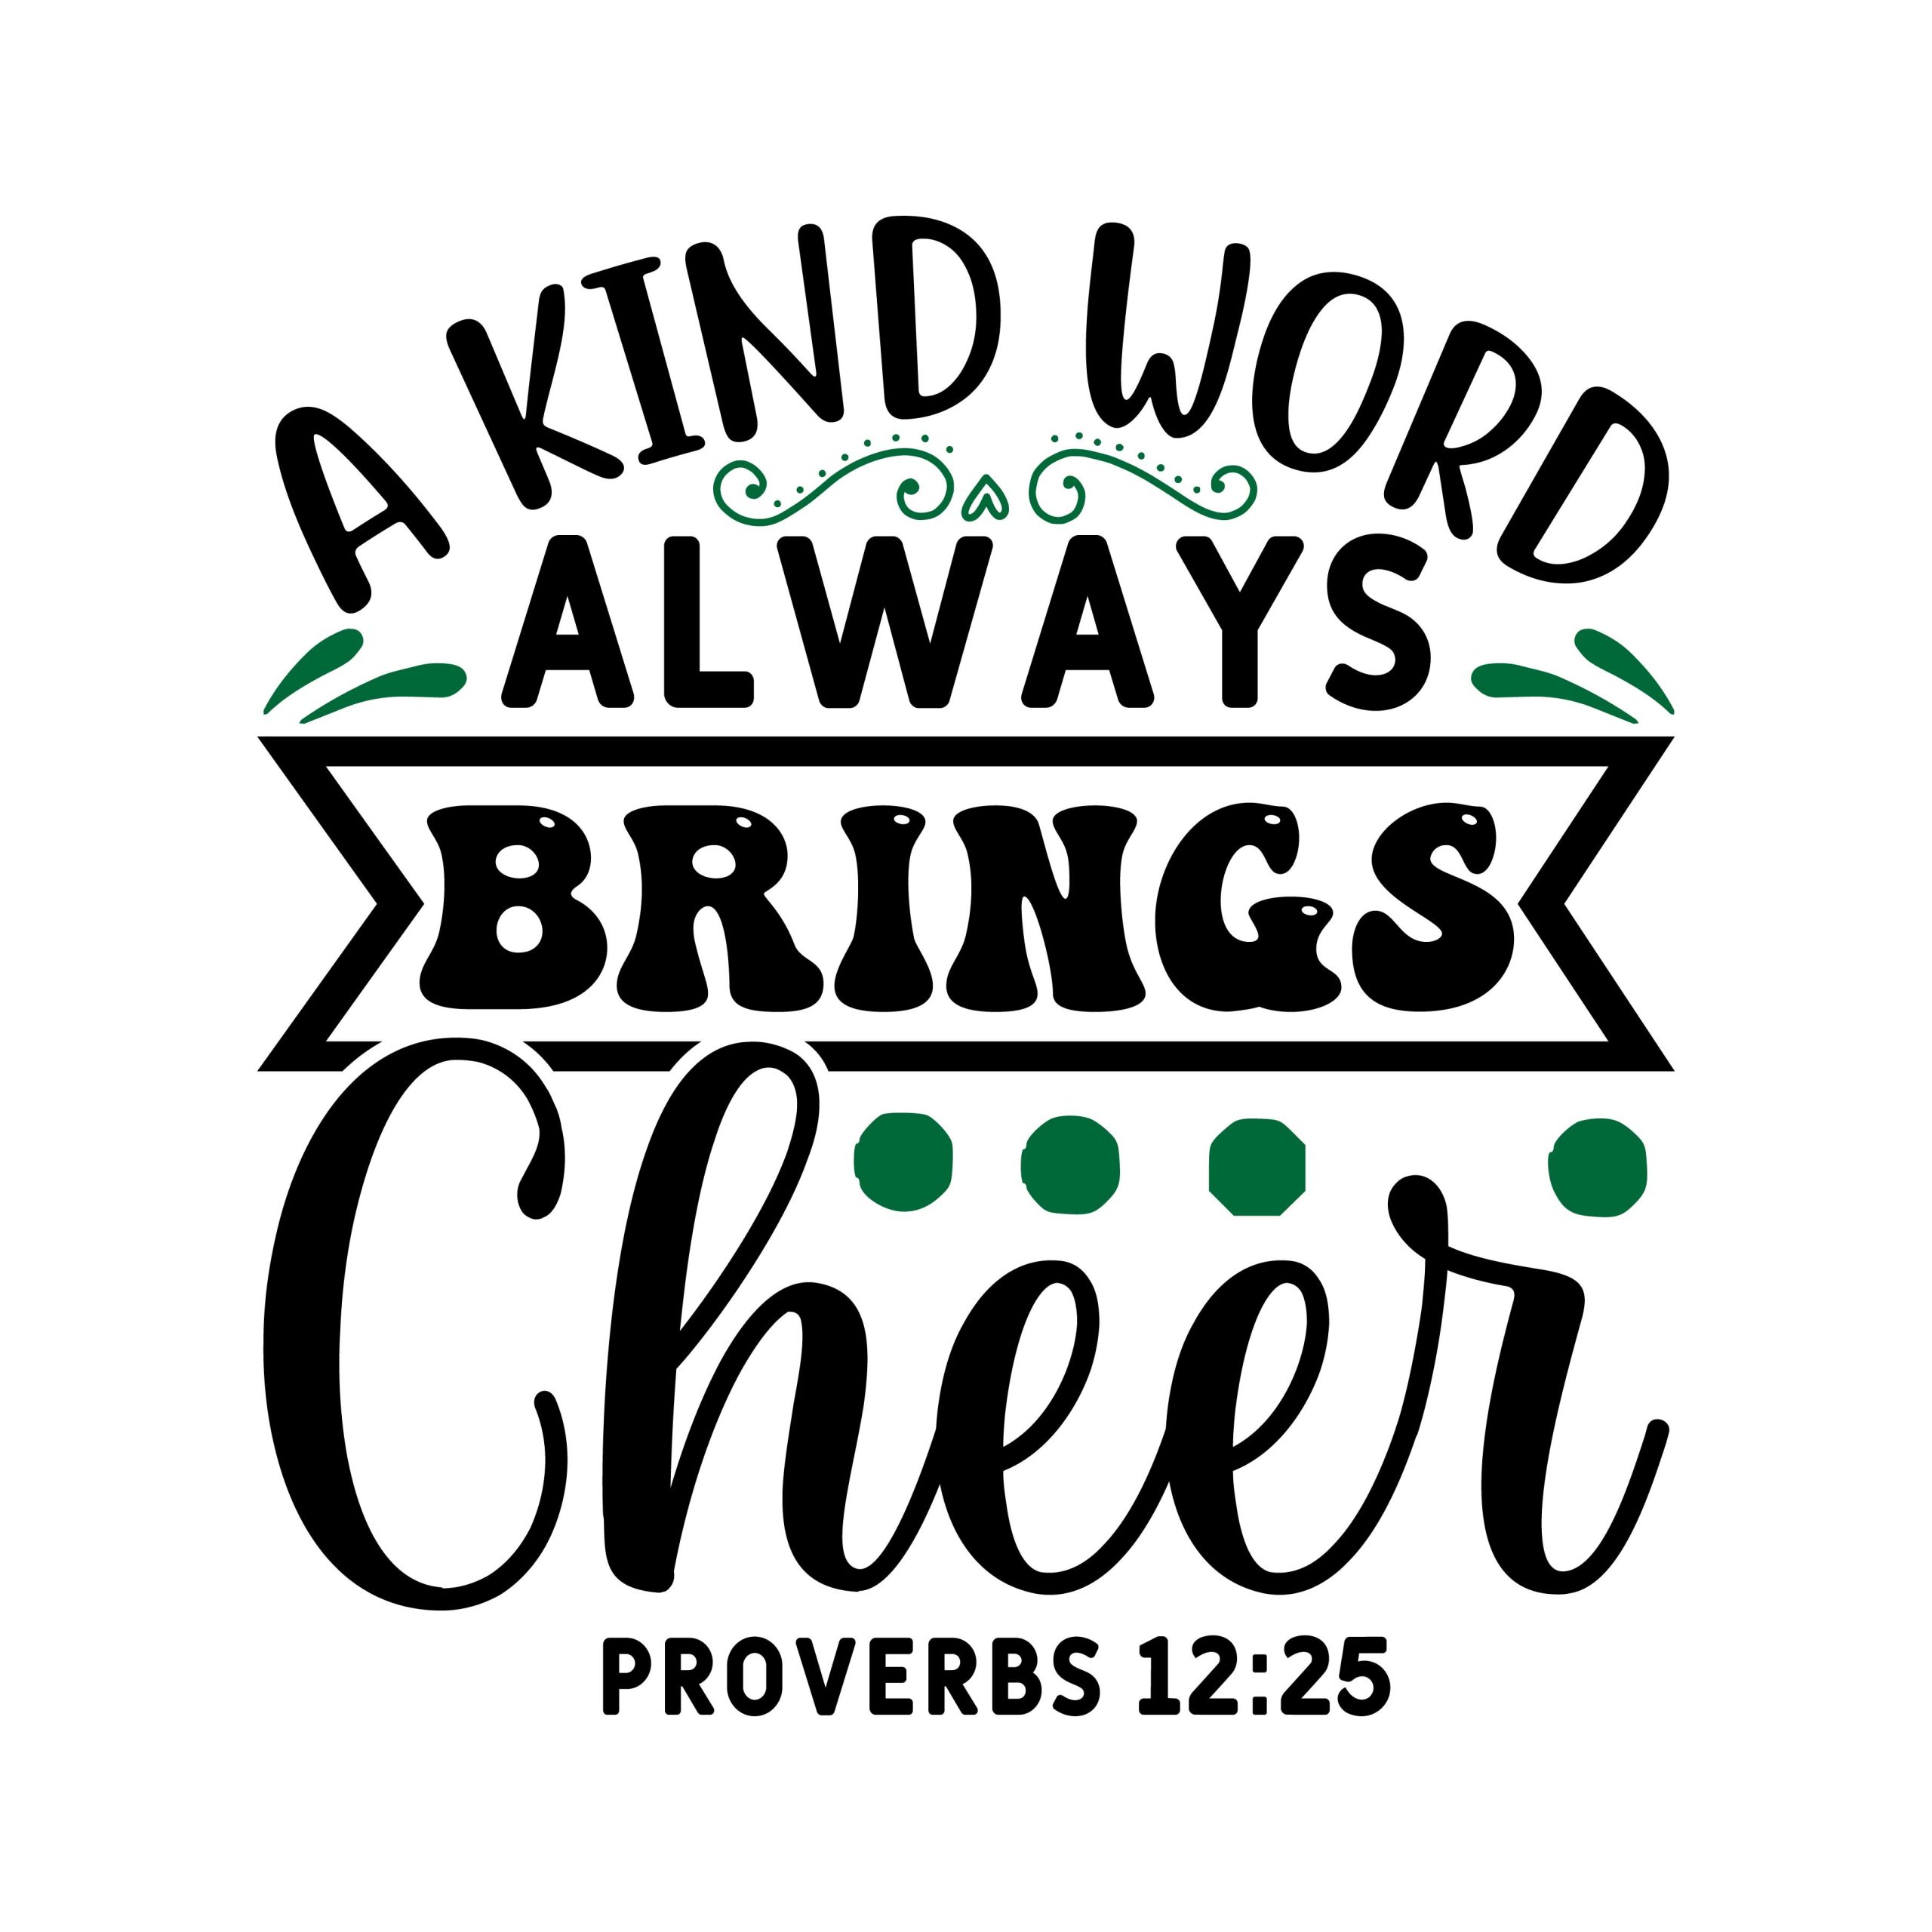 A kind word always brings cheer Proverbs 12:25, bible verses, scripture verses, svg files, passages, sayings, cricut designs, silhouette, embroidery, bundle, free cut files, design space, vector